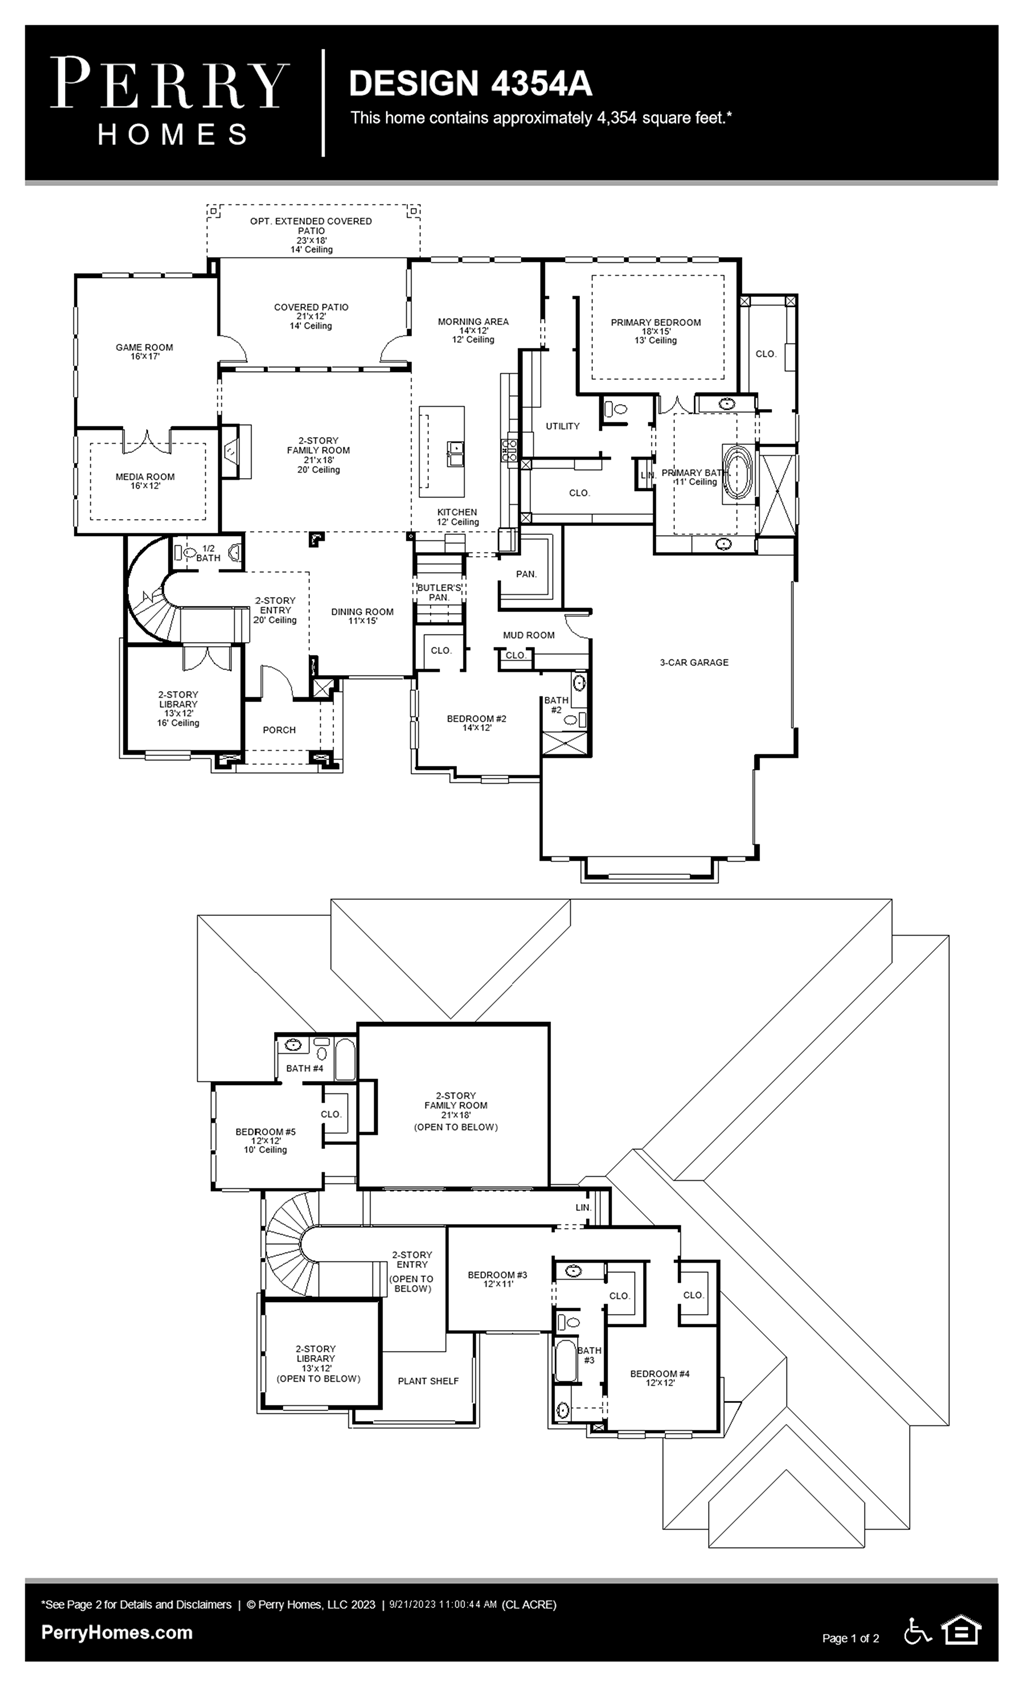 Floor Plan for 4354A